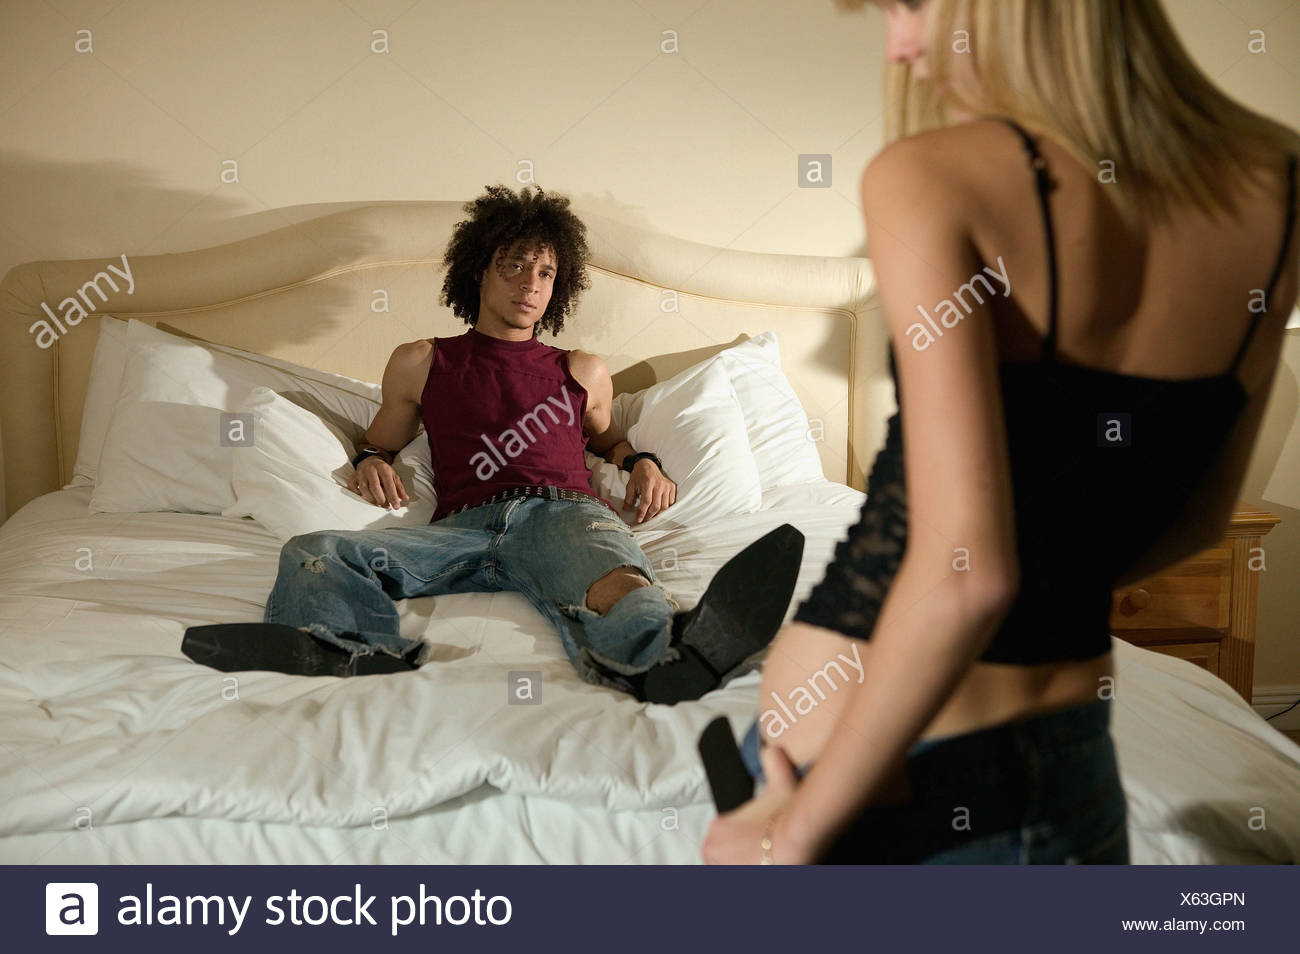 A Young Woman Stripping For A Young Man Stock Photo